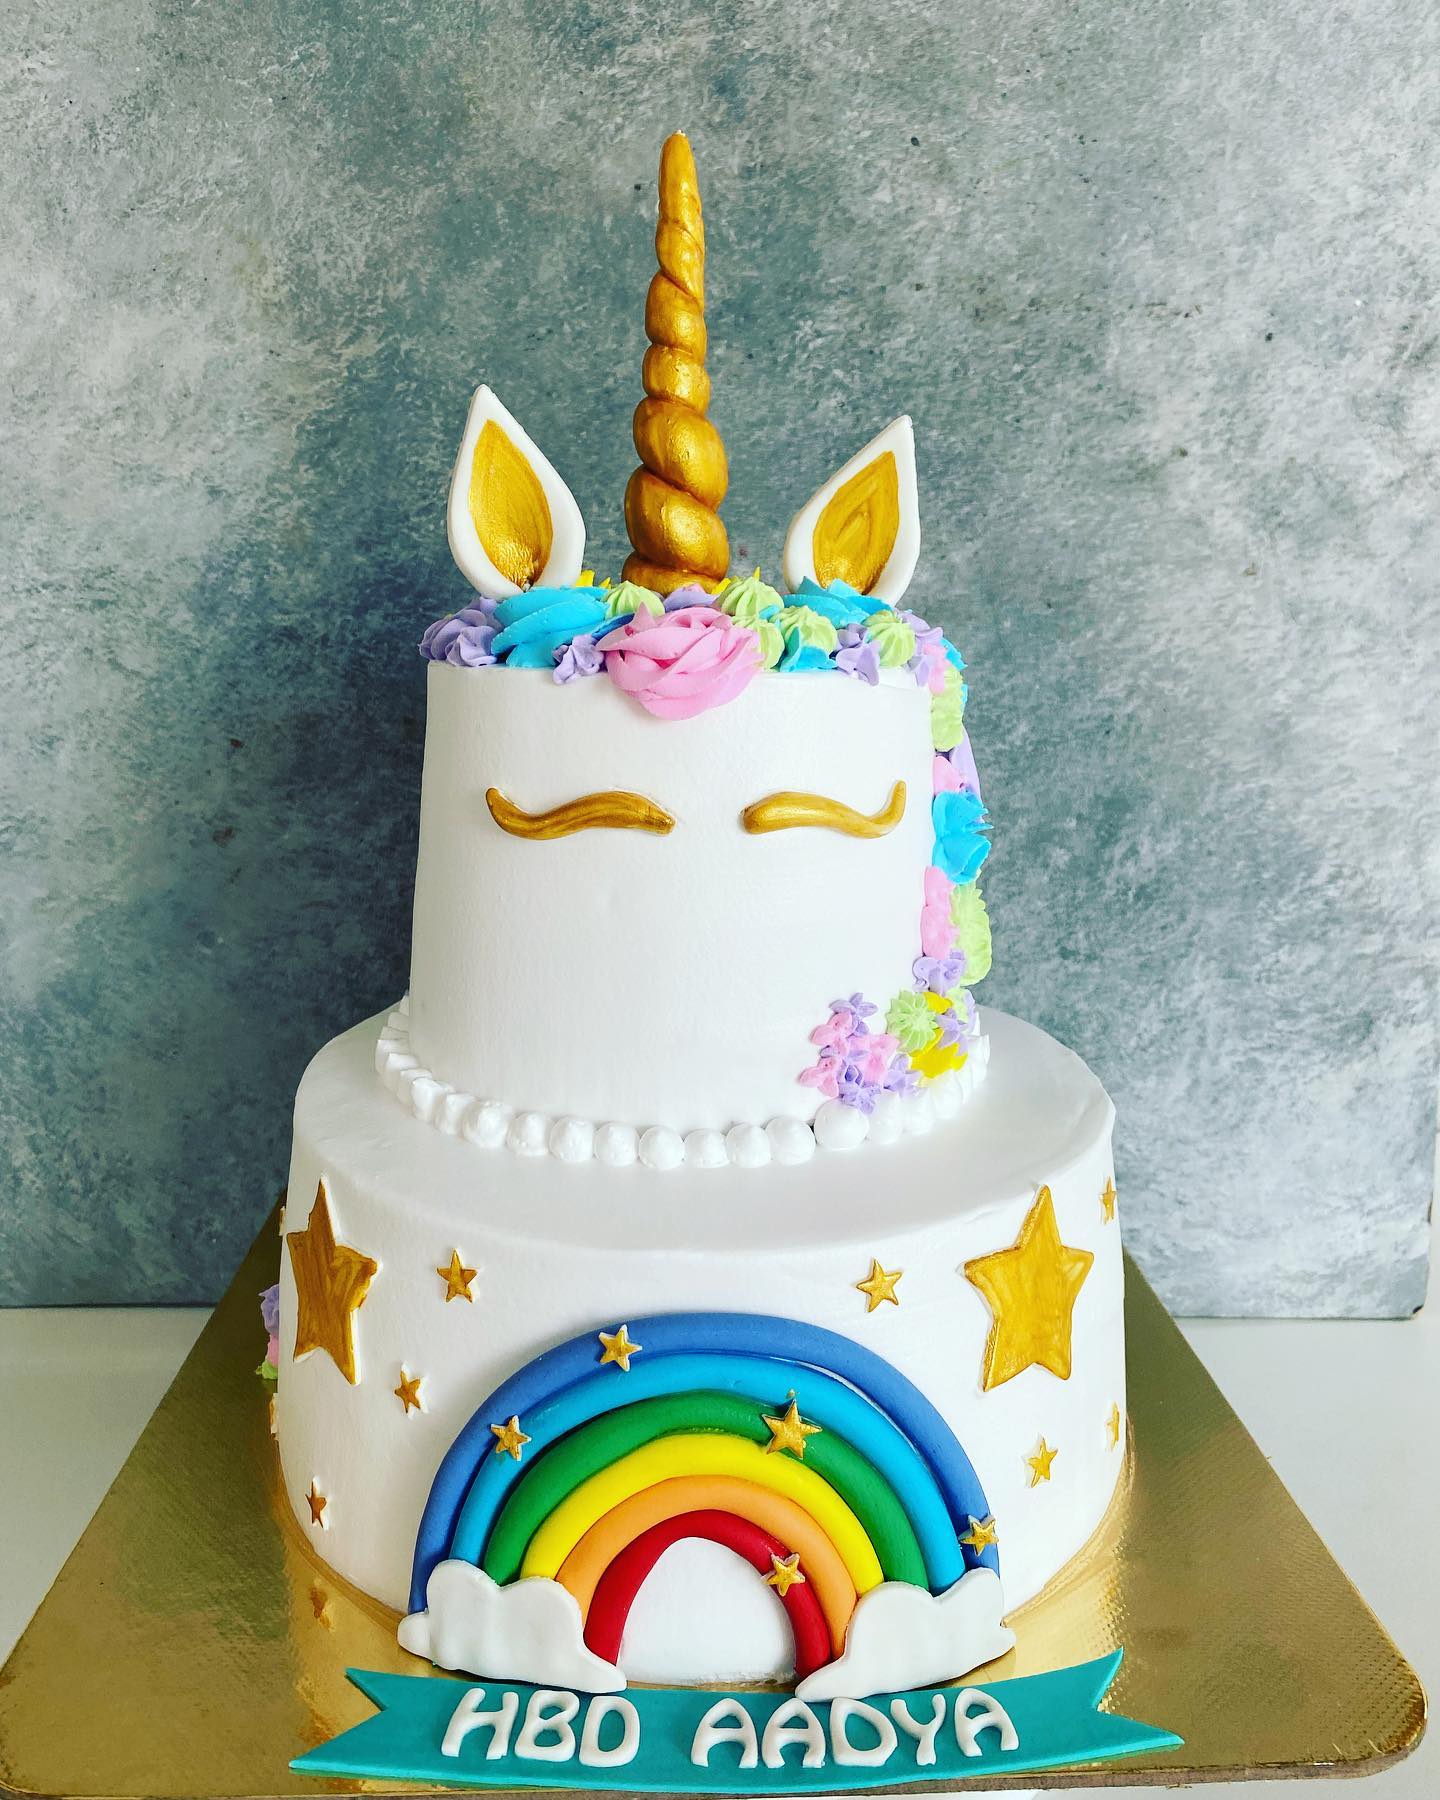 Sight to behold with our beautiful Unicorn 🦄 🌈 ⭐️☁️

#unicorn #unicorncake #unicornthemecake #unicorn #cakeartist #love #food #onmytable #trending #trendingcakes